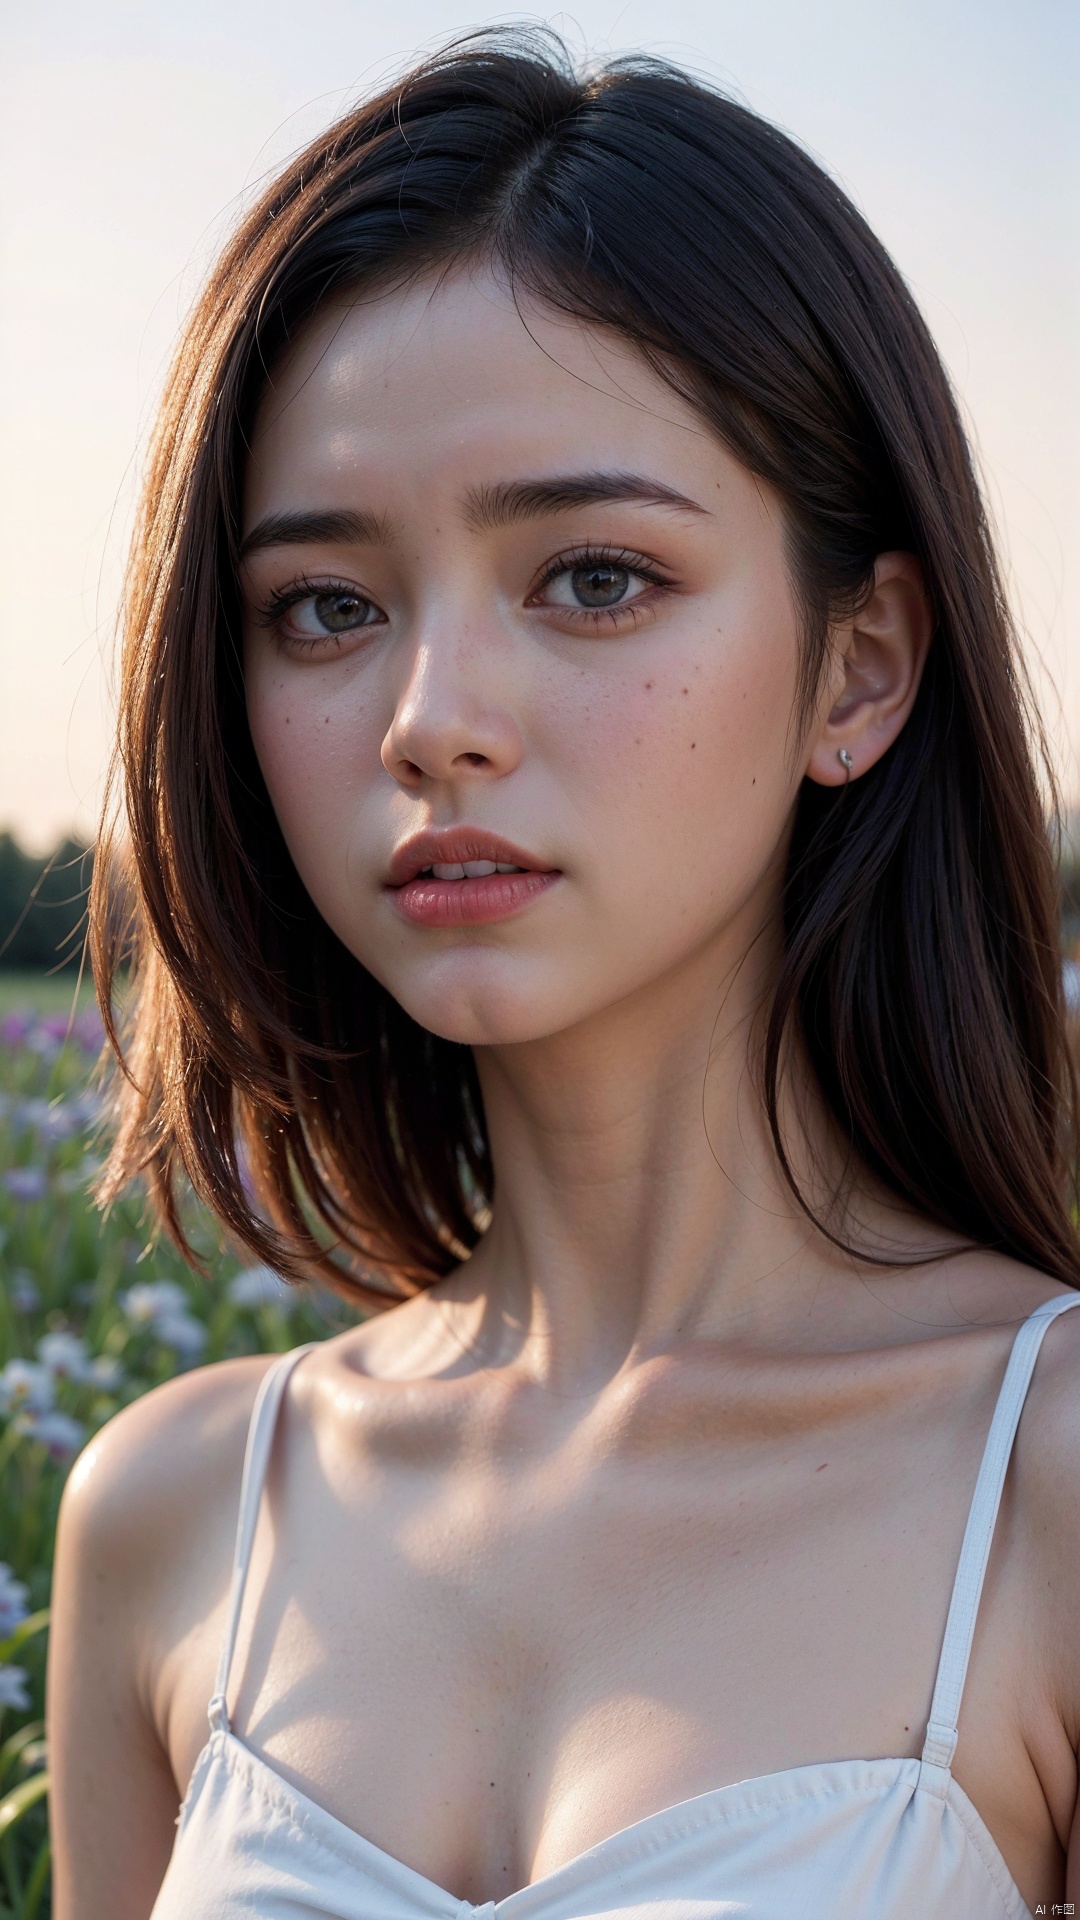 (1 girl), (summer night sunset:1.3), (8k, RAW photo, best quality, masterpiece:1.2), (realistic, photo-realistic:1.37), best quality, ultra high res, (focus face:1.8), (portrait face:1.7), (high contrast:1.1), (intense:1.1), (detailed:1.1), (highest quality), (analog:1.2), (high sharpness), photographed by Canon EOS R6, 135mm, 1/1250s, f/2.8, ISO 400, (summer dress:1.4), (standing in flower field:1.3), (vibrant, colorful:1.3)